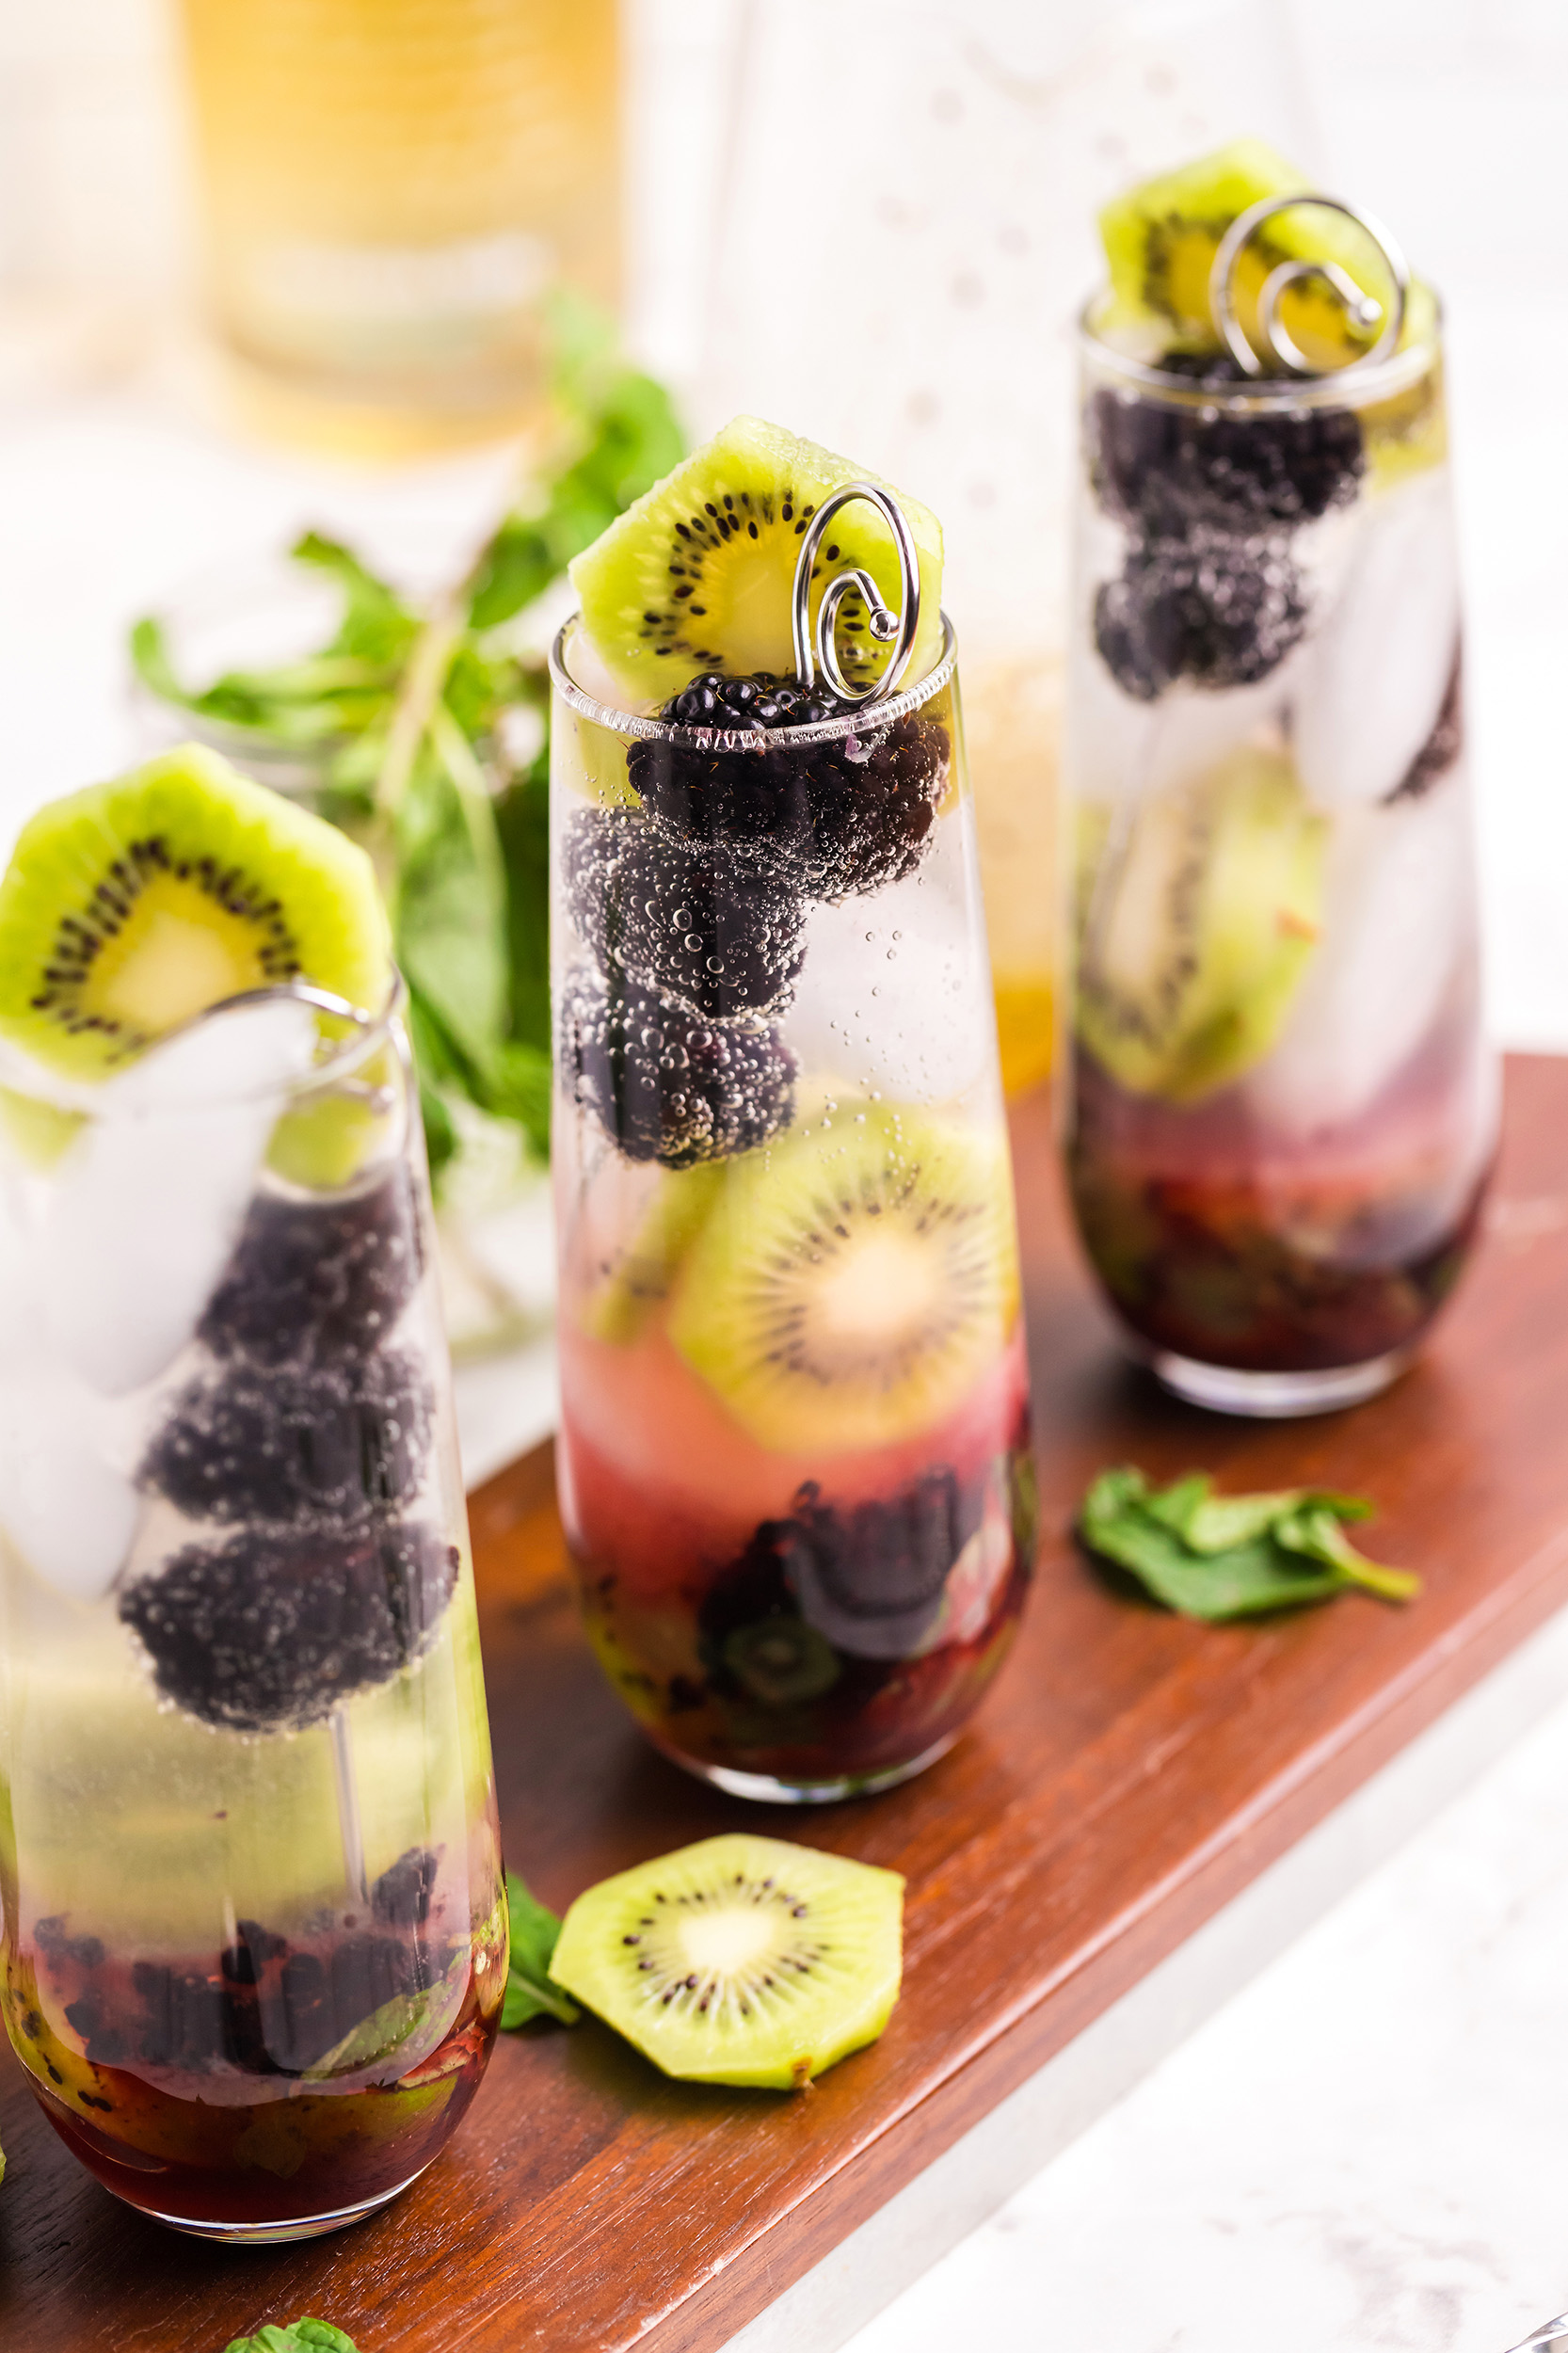 kiwi rounds added as garnish to a completed kiwi mojito